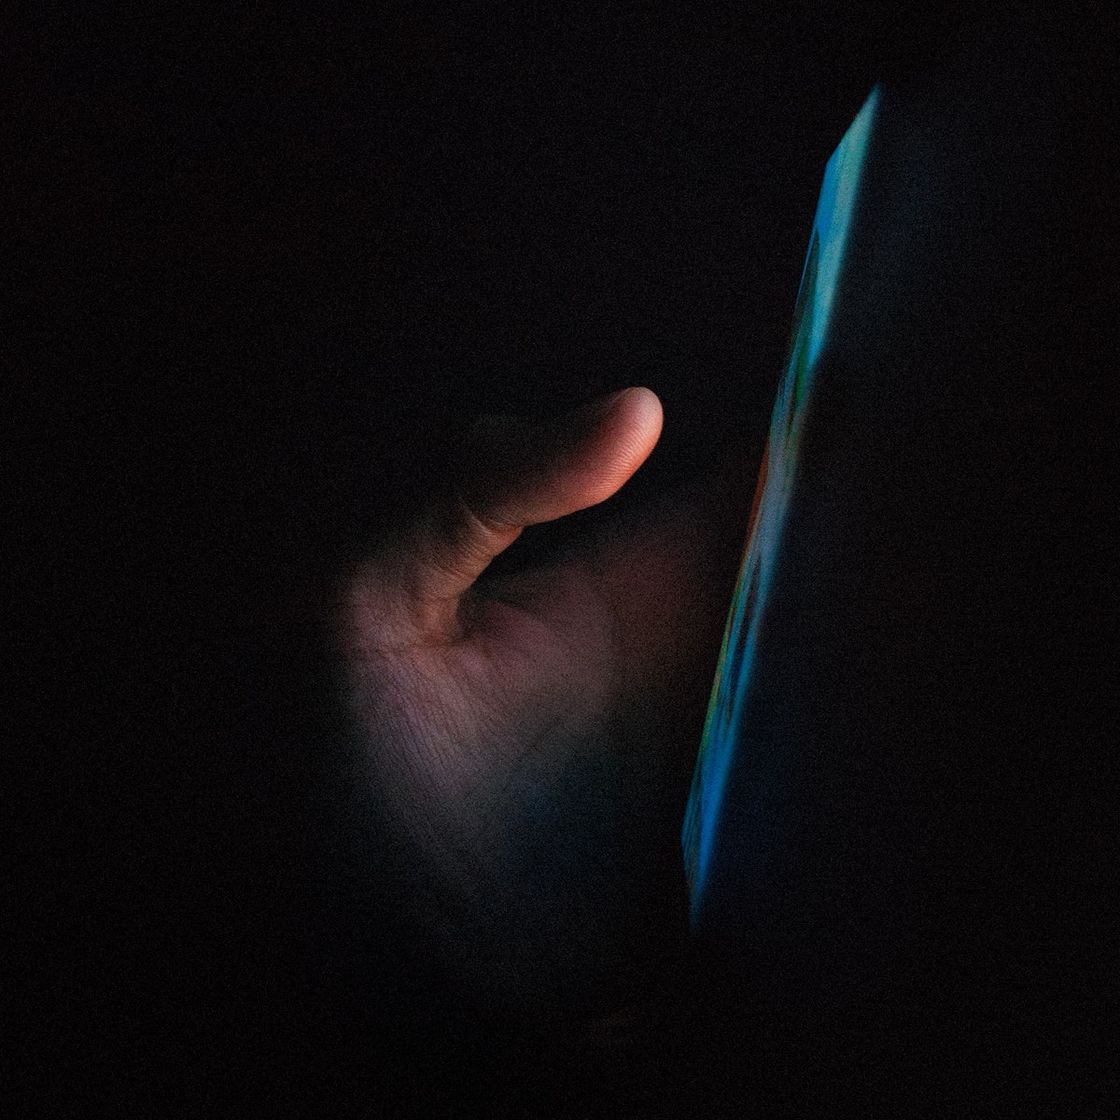 A hand holding a phone with a web app on the screen glows in the dark